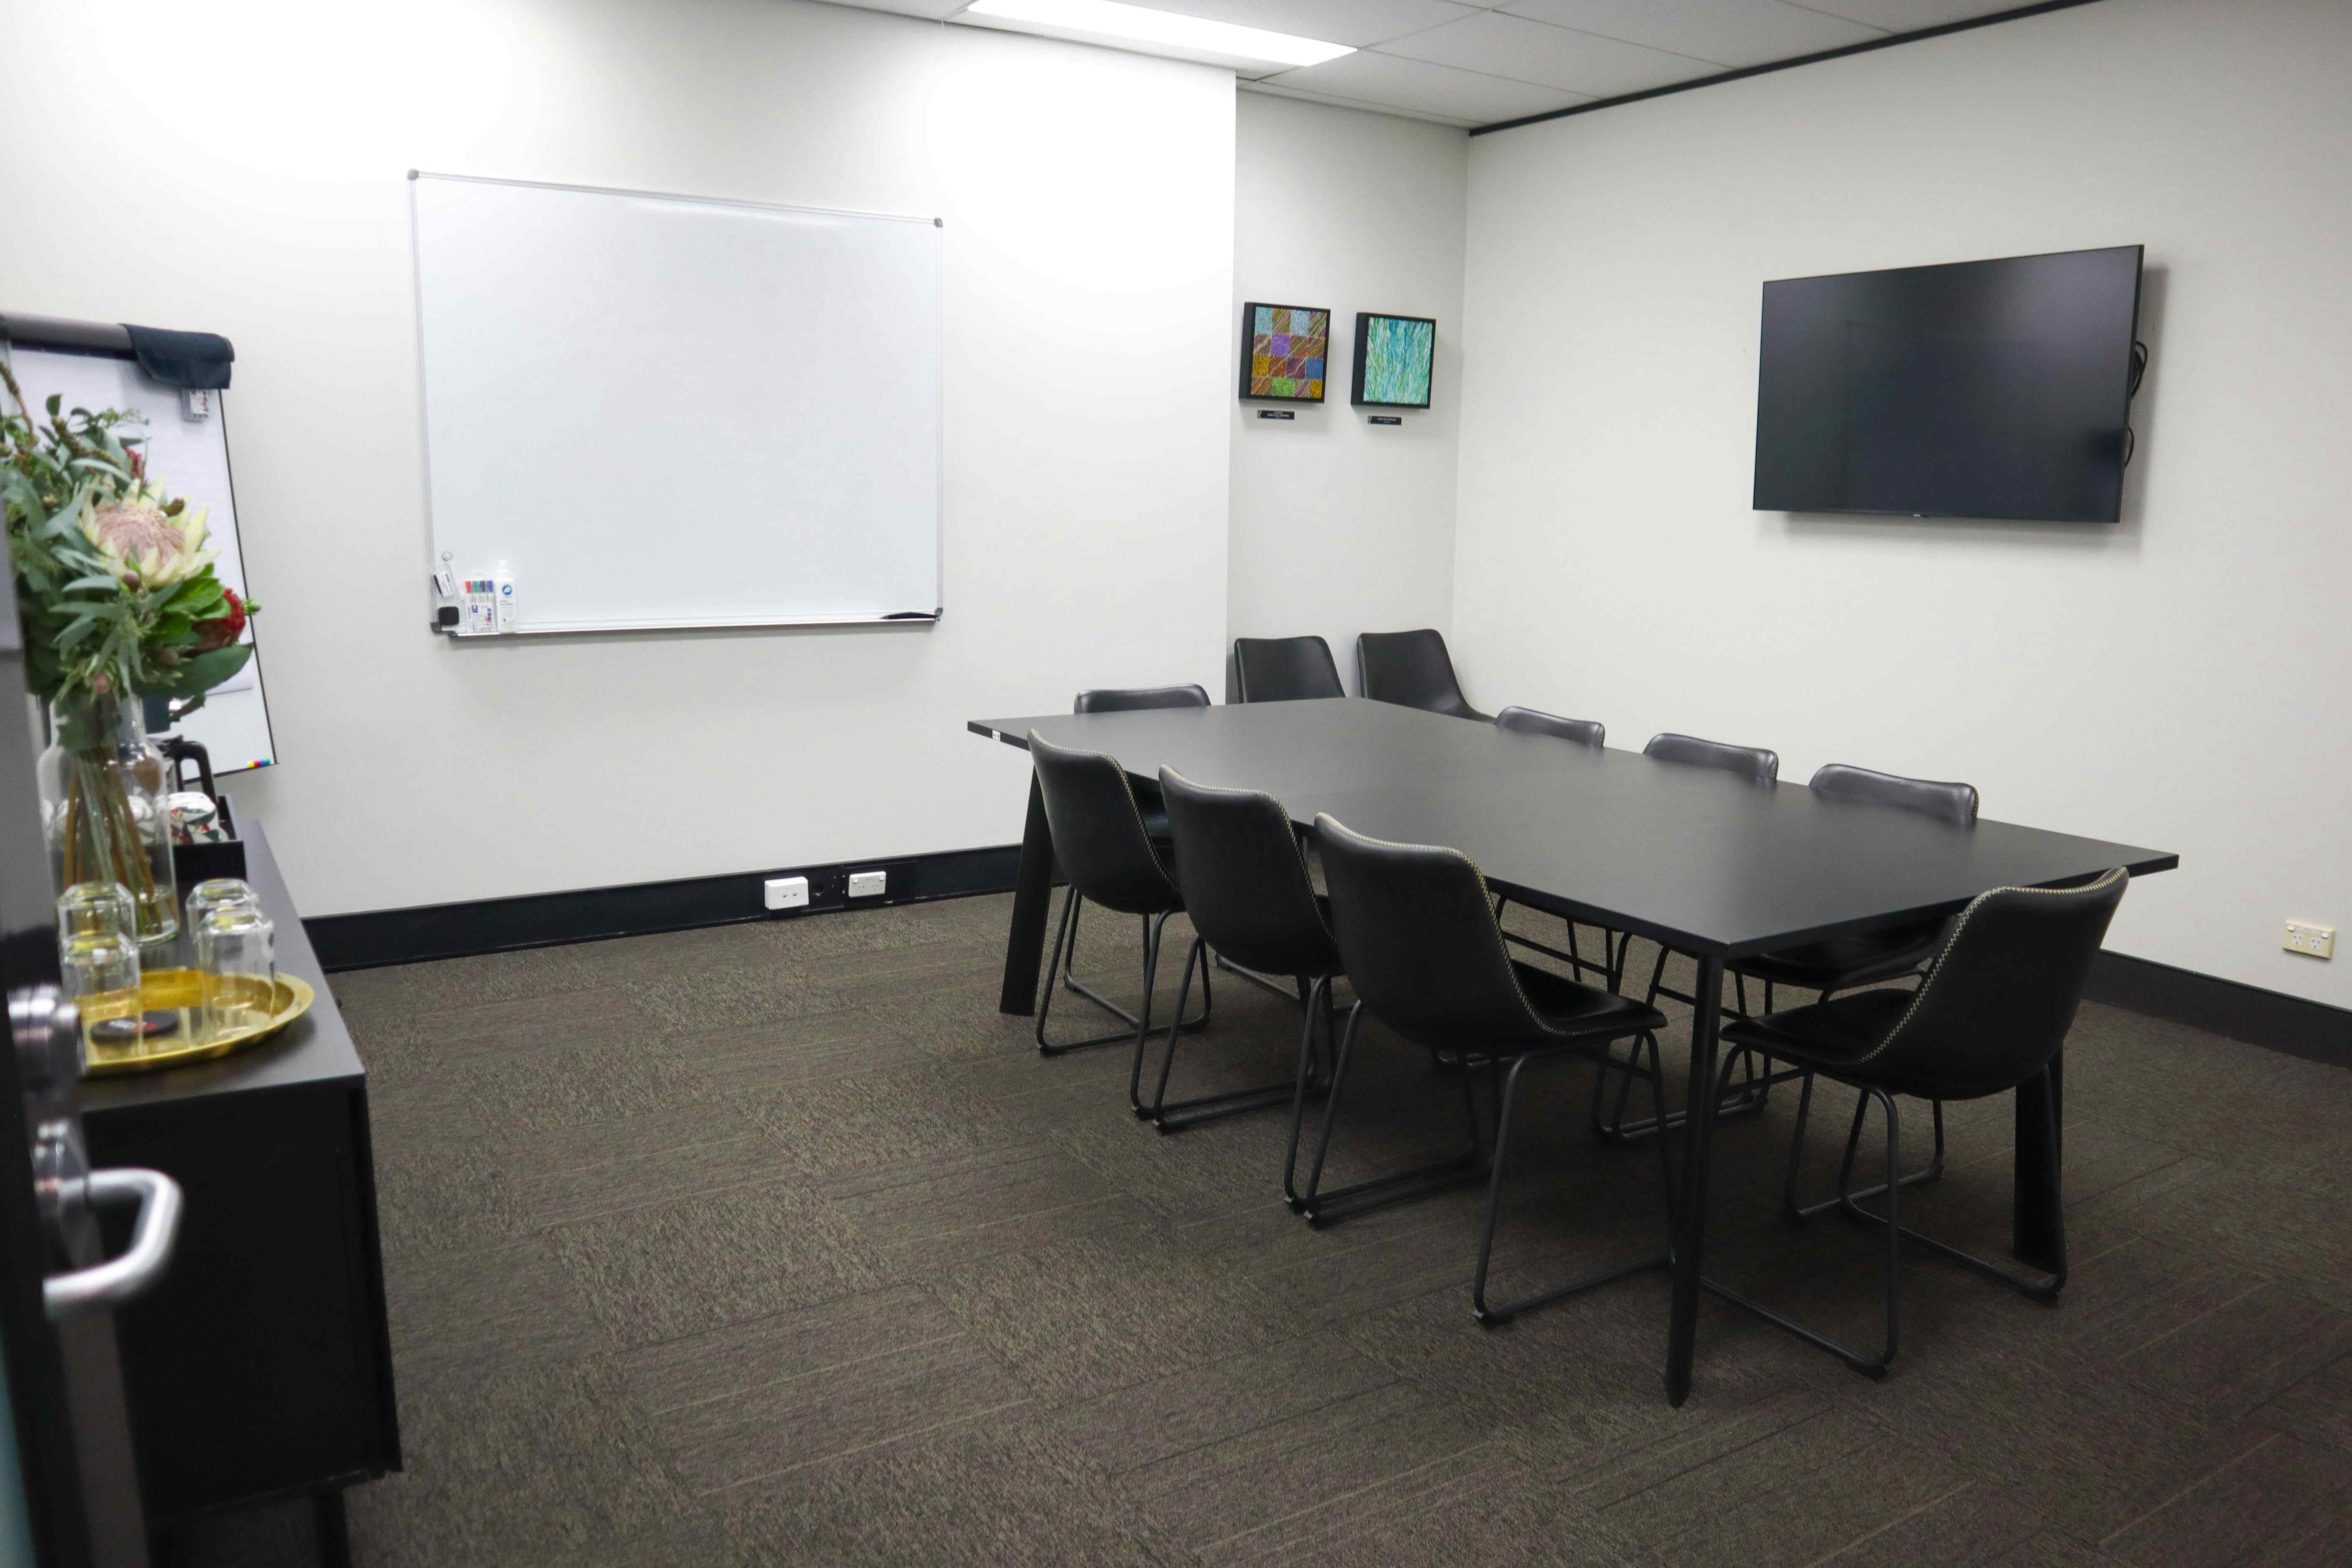 Reilly Meeting Room, Public Works Professionals